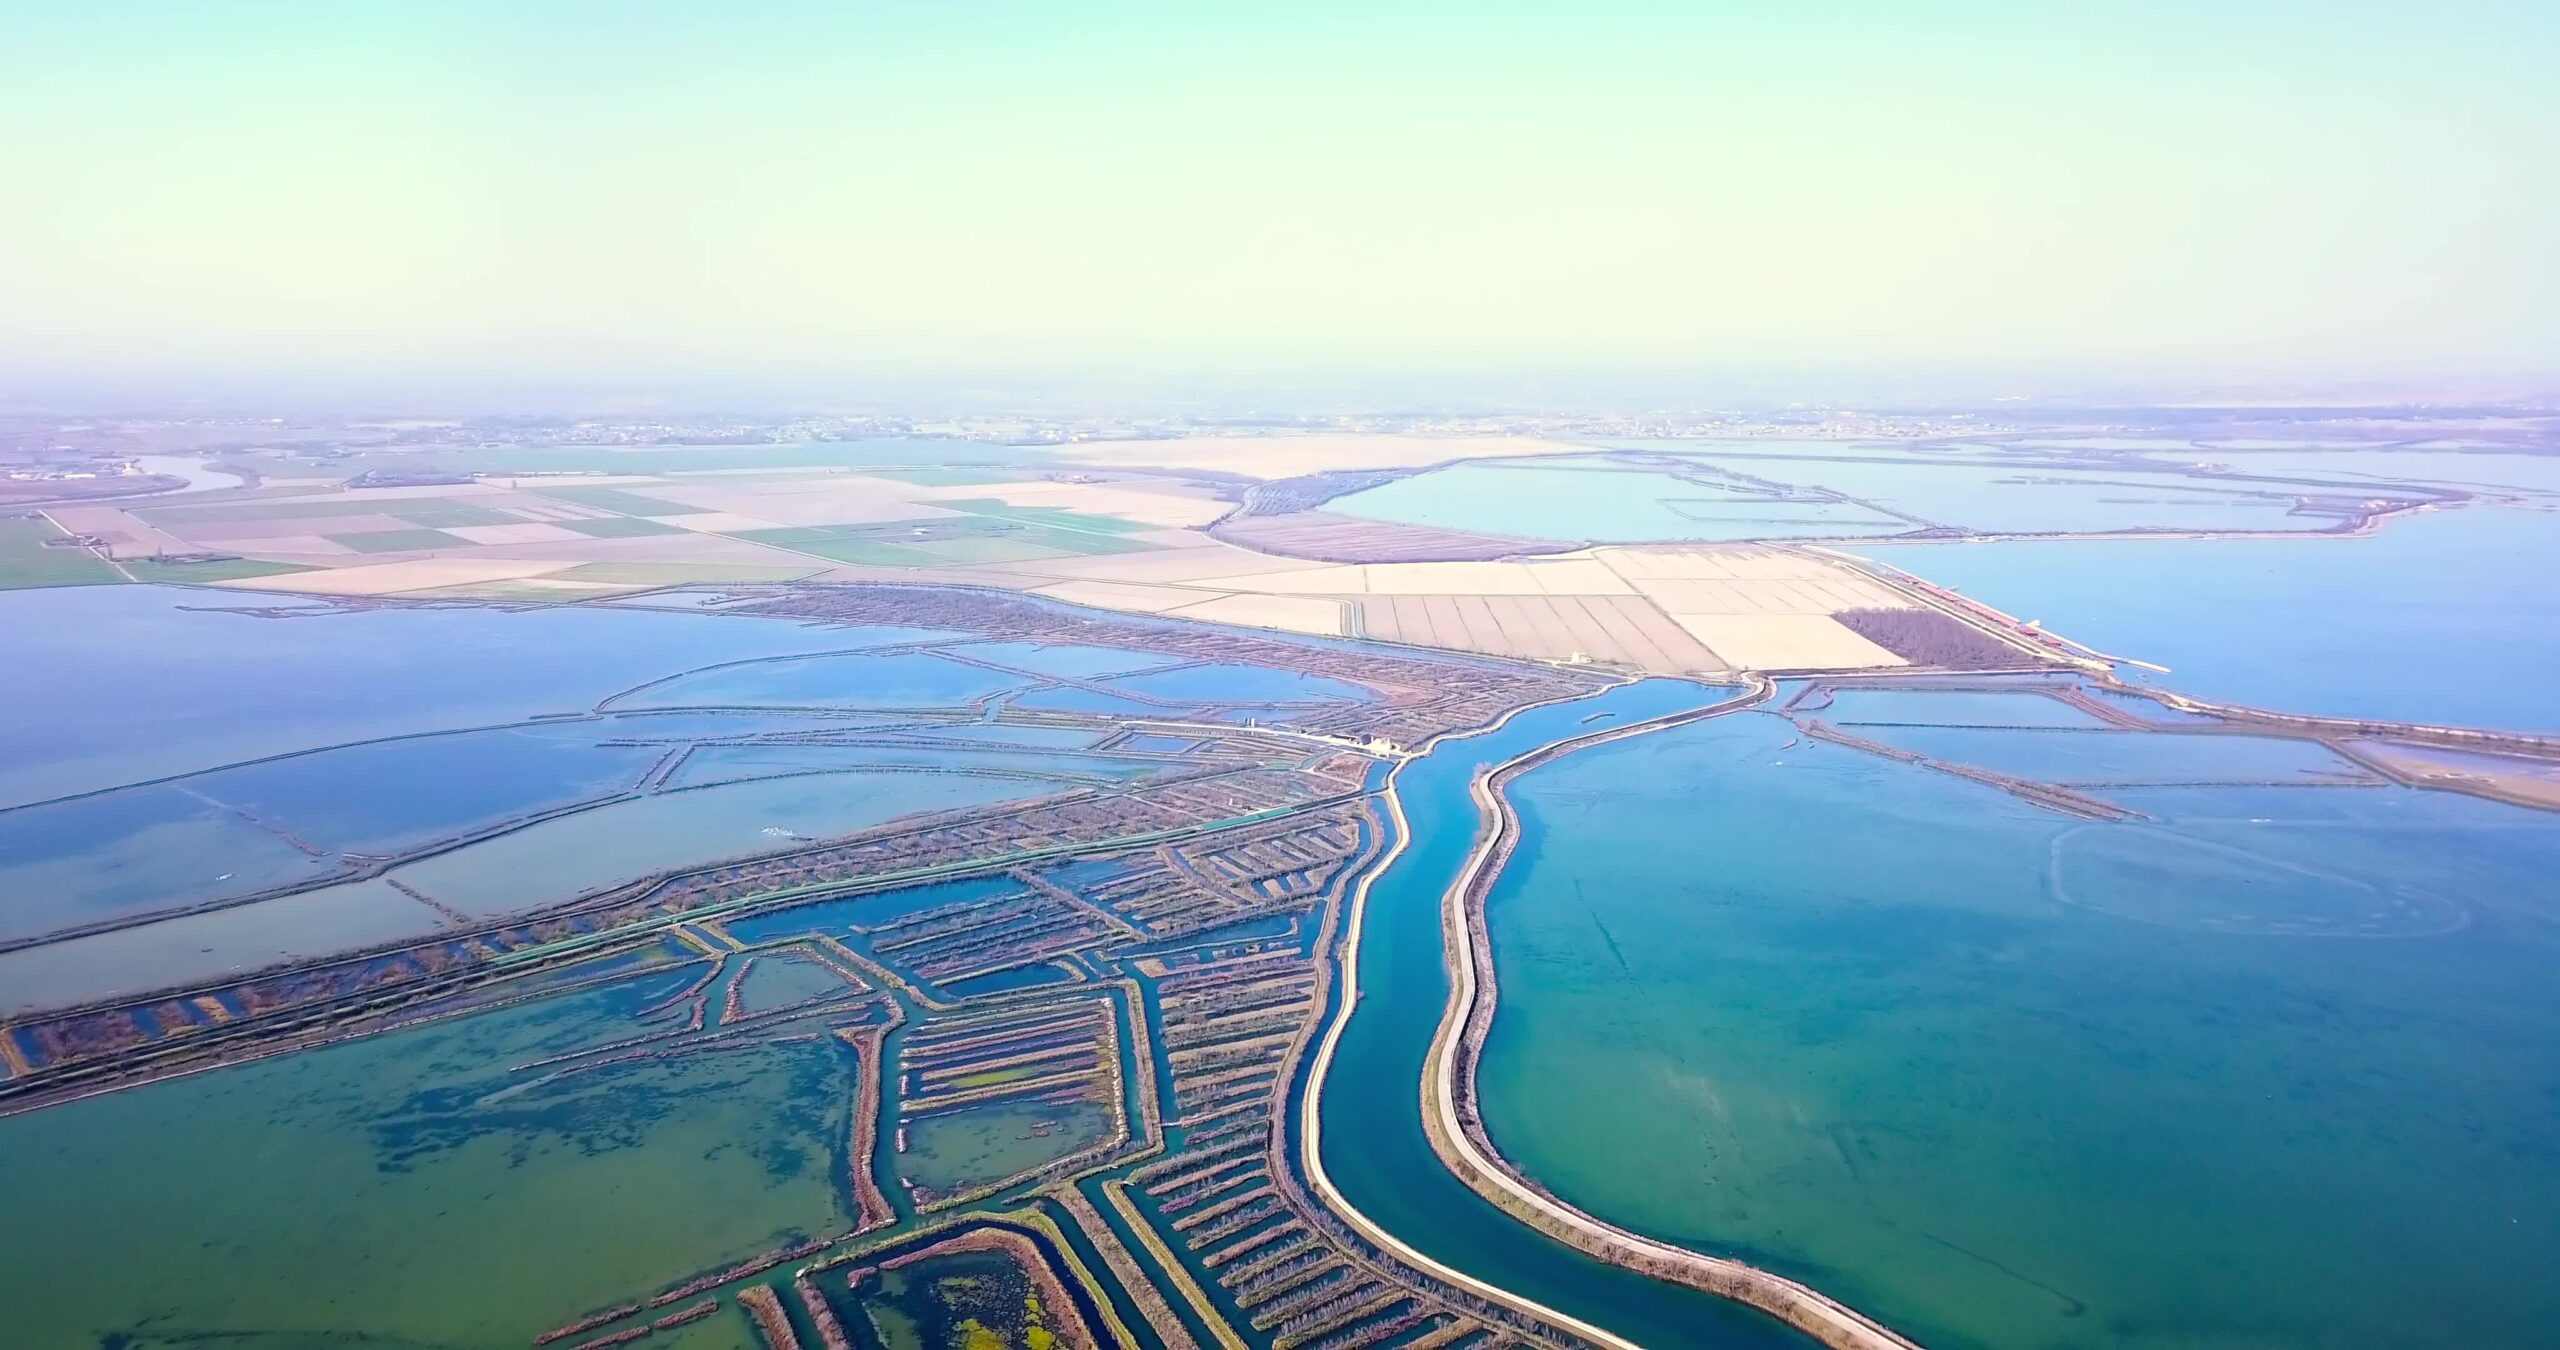 Boundless dry fields and colorful Venetian bays near polders